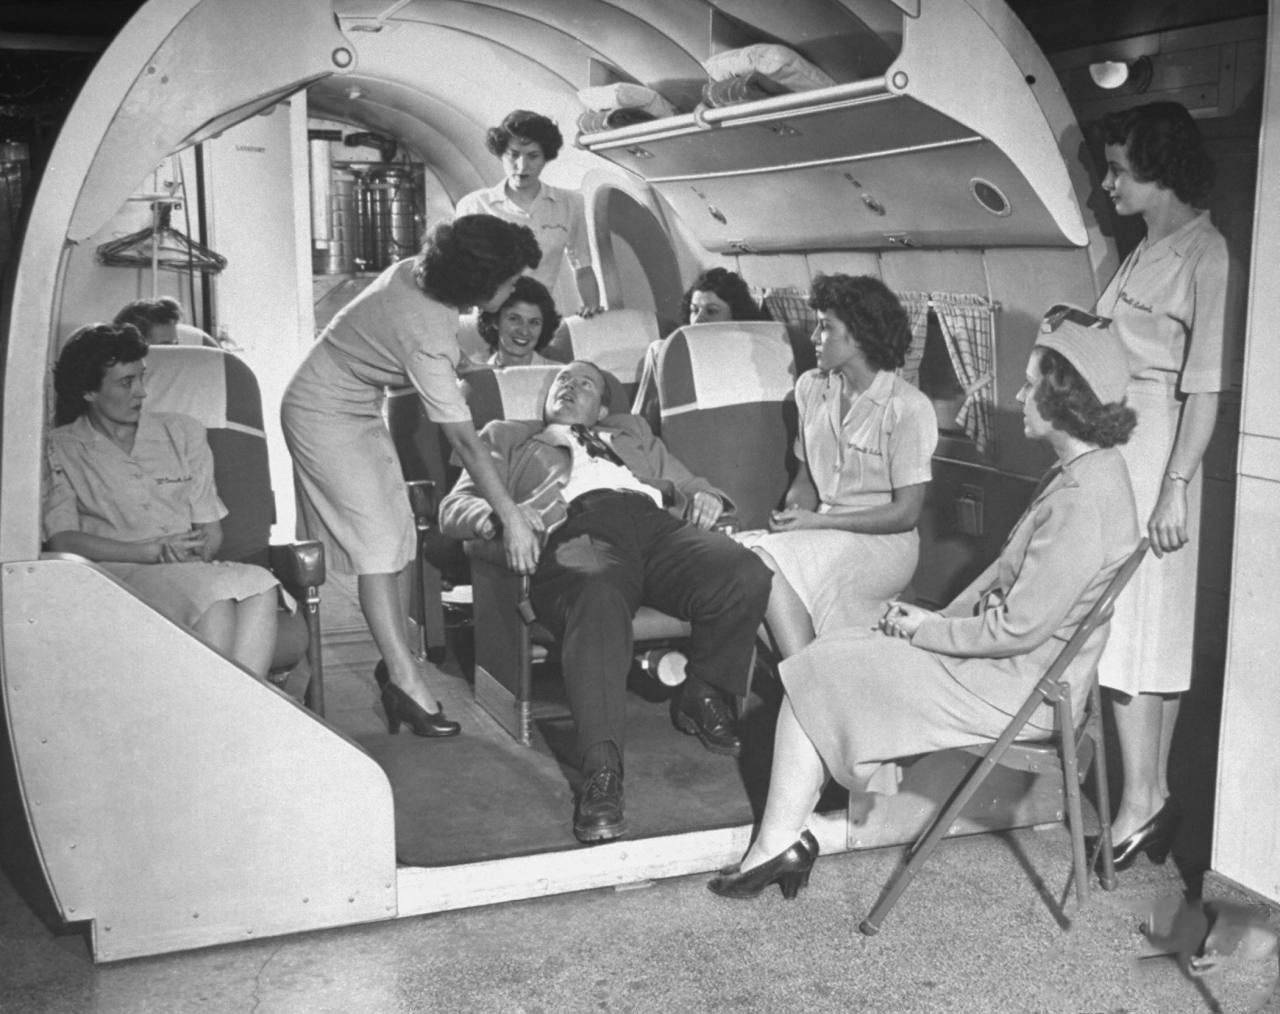 Students at the McConnell Air Hostess School learning how to deal with inebriated passengers.